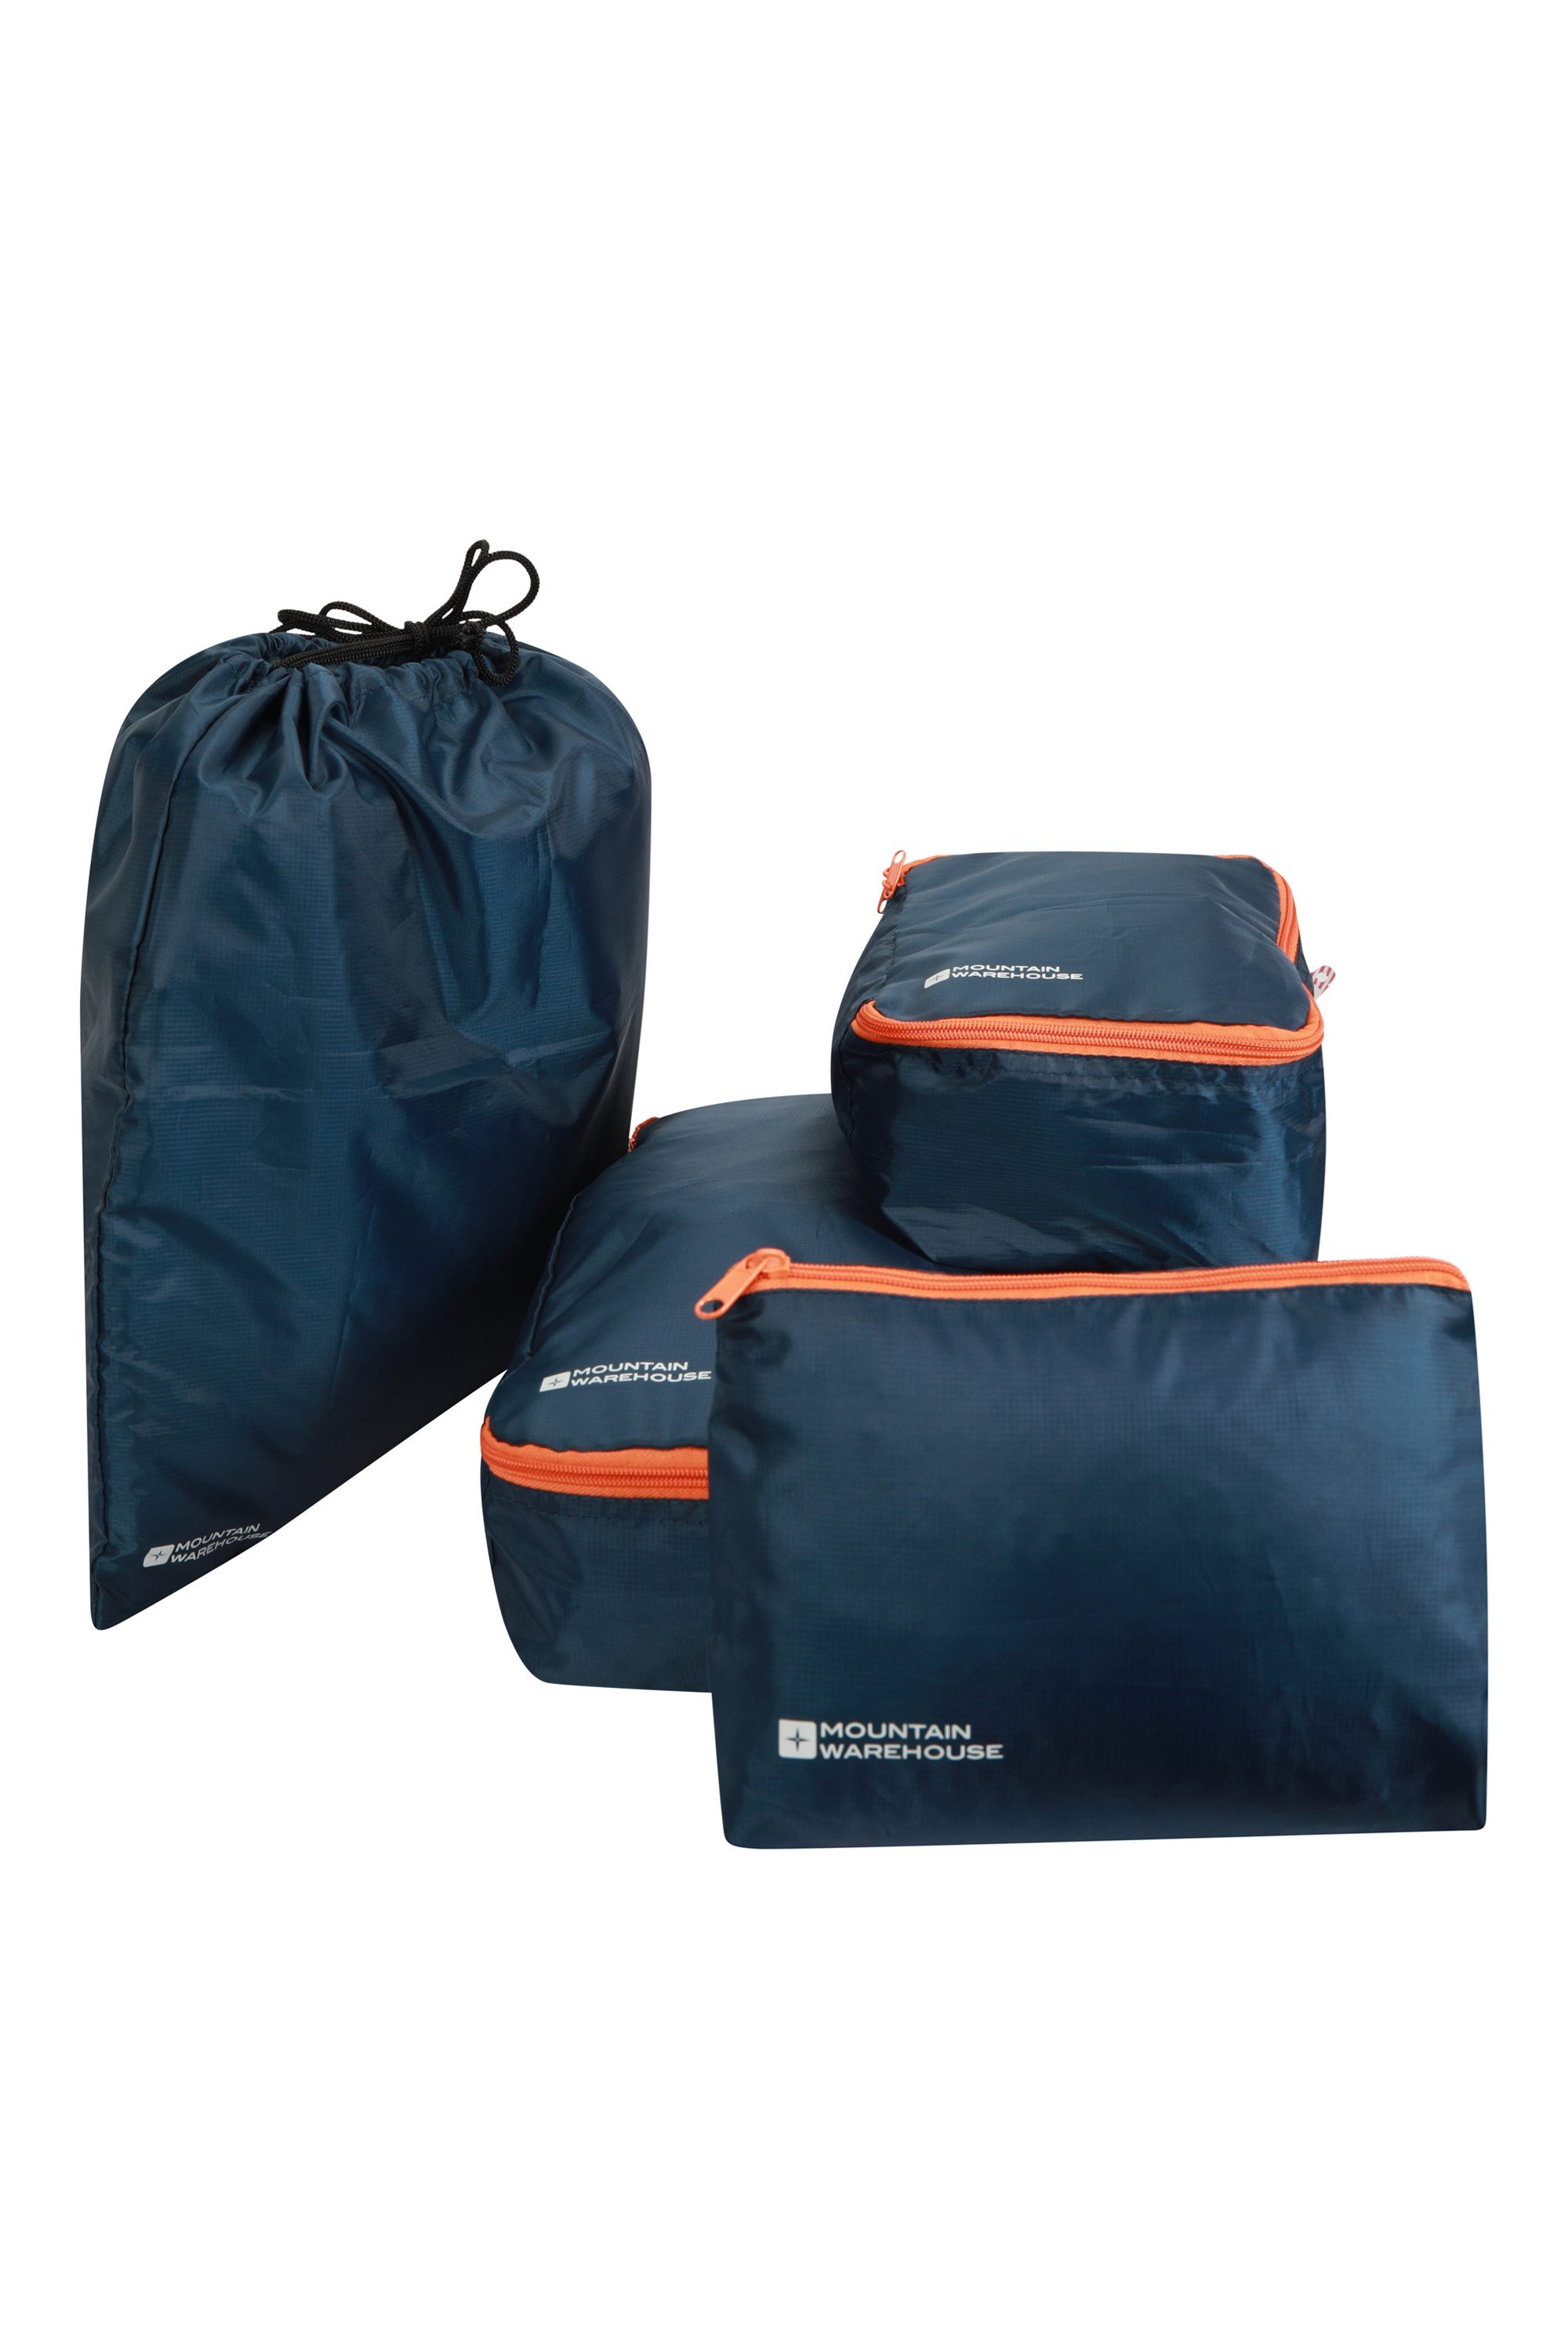 Packing Cubes - Set of 4 - Navy